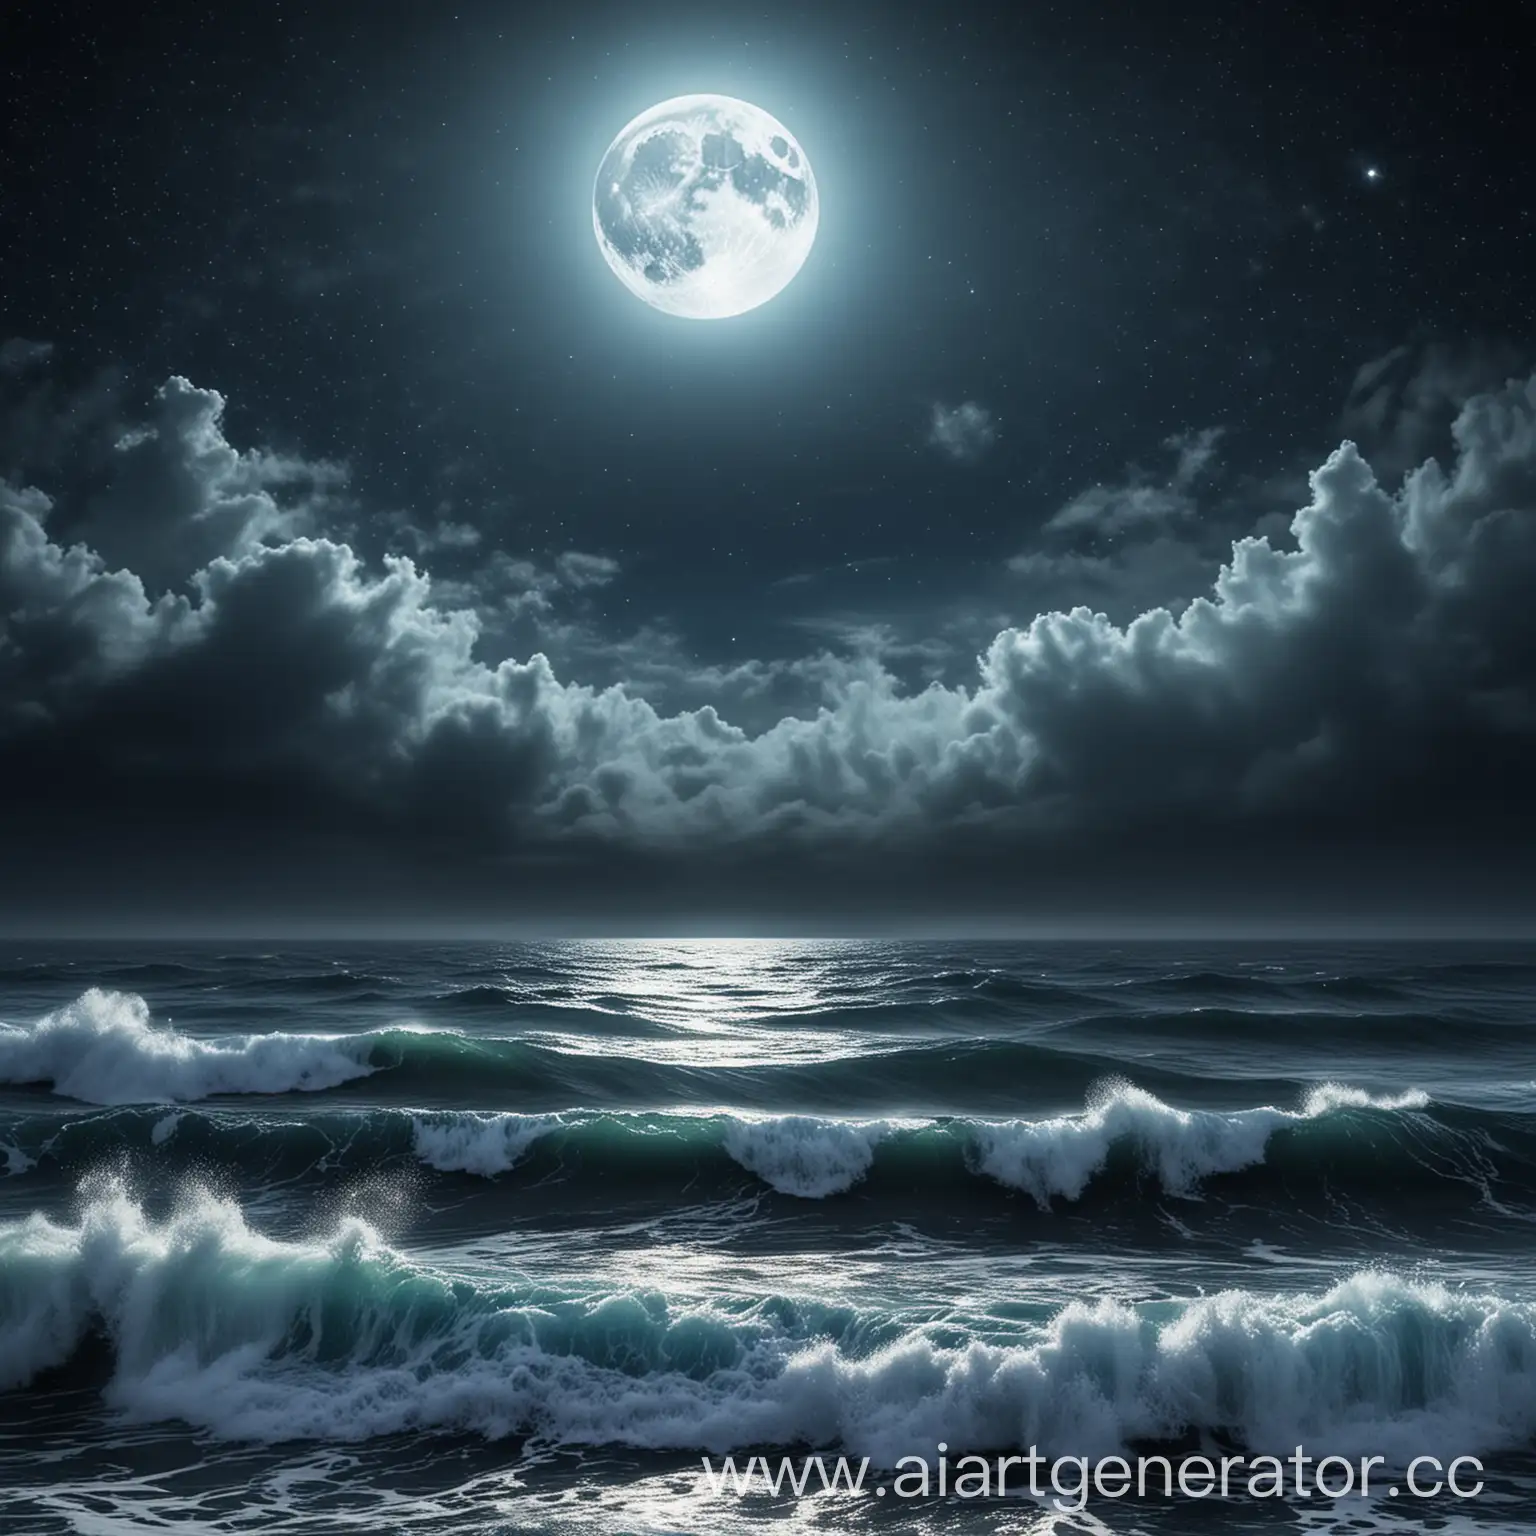 Moonlit-Ocean-with-Majestic-Waves-and-Starry-Sky